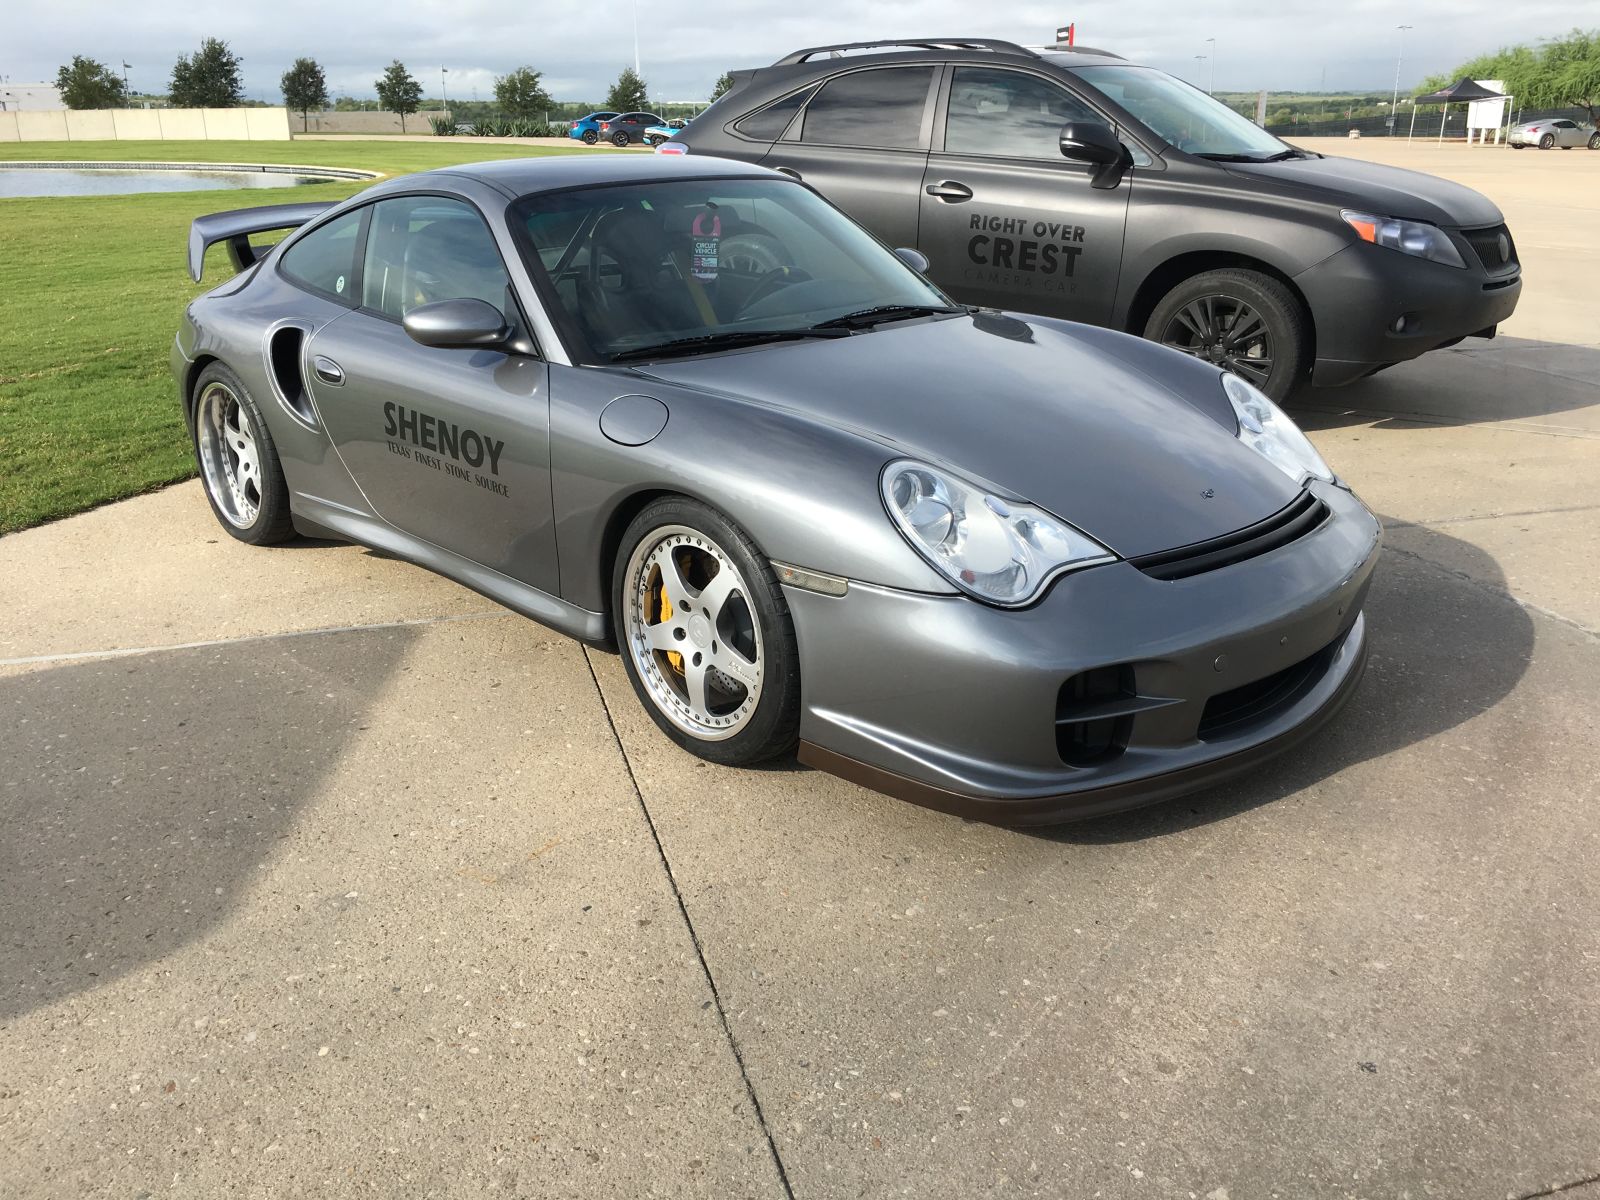 I’m pretty sure this is the first RUF I’ve seen in person. On display at COTA for the World RX event.